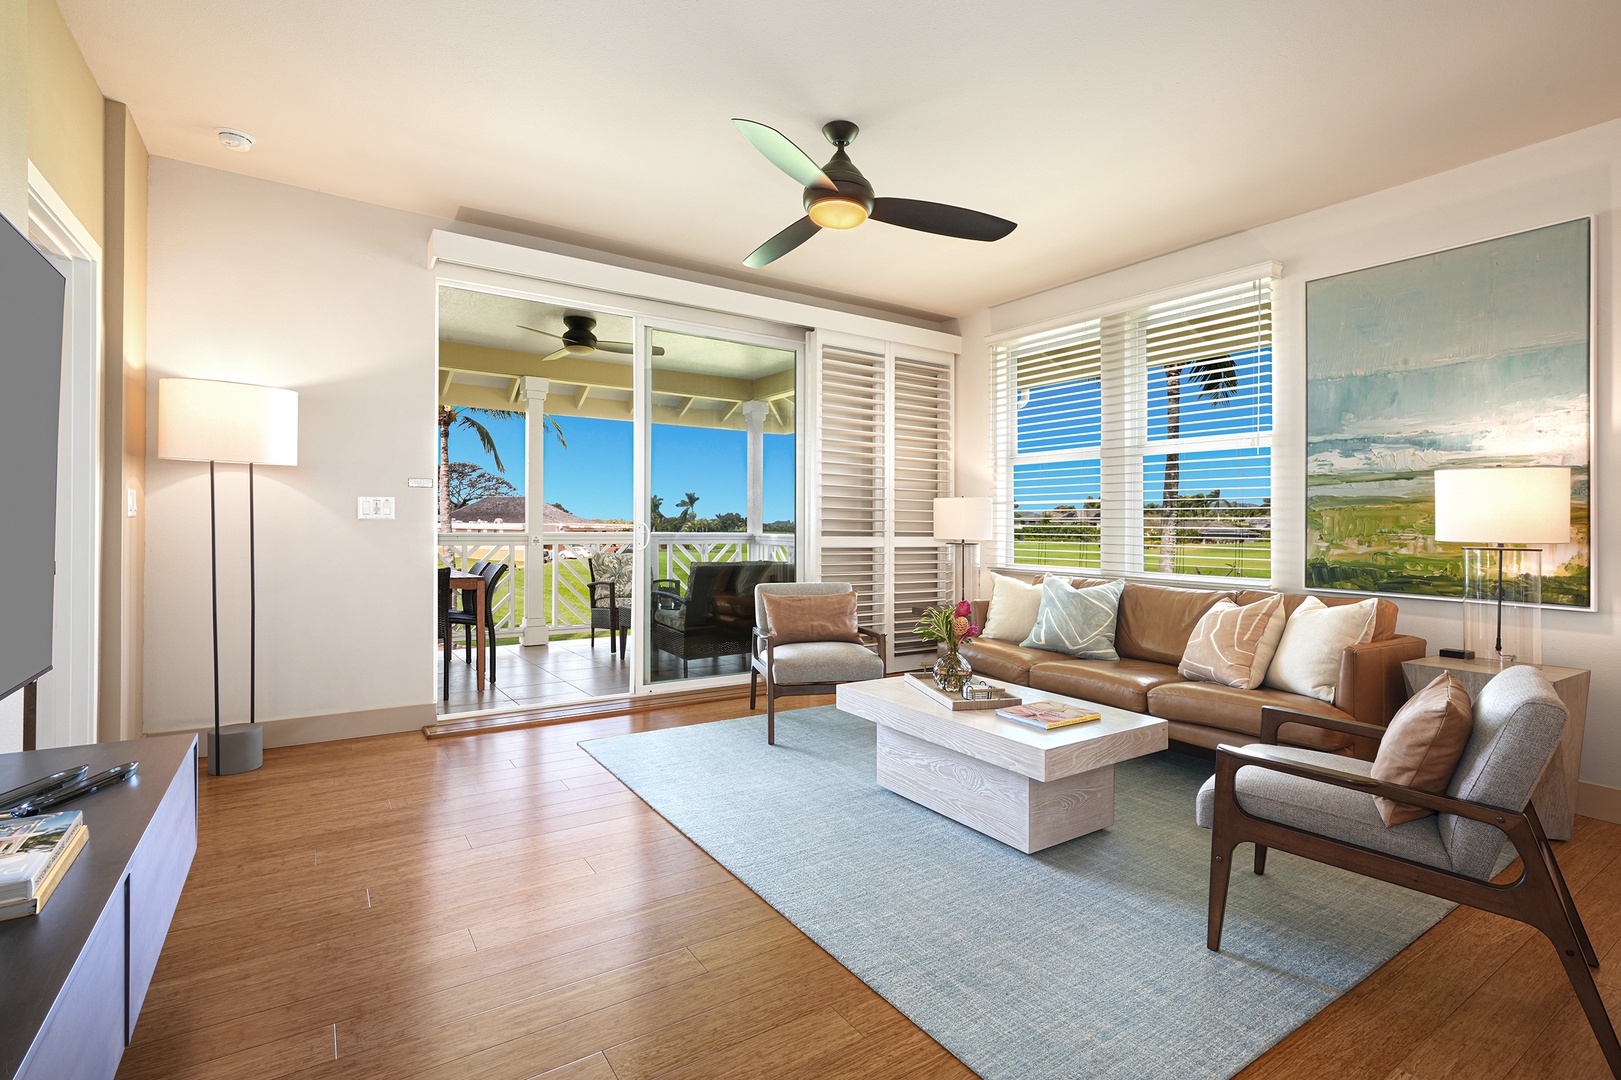 Koloa Vacation Rentals, Pili Mai 11K - The living room is drenched in natural light